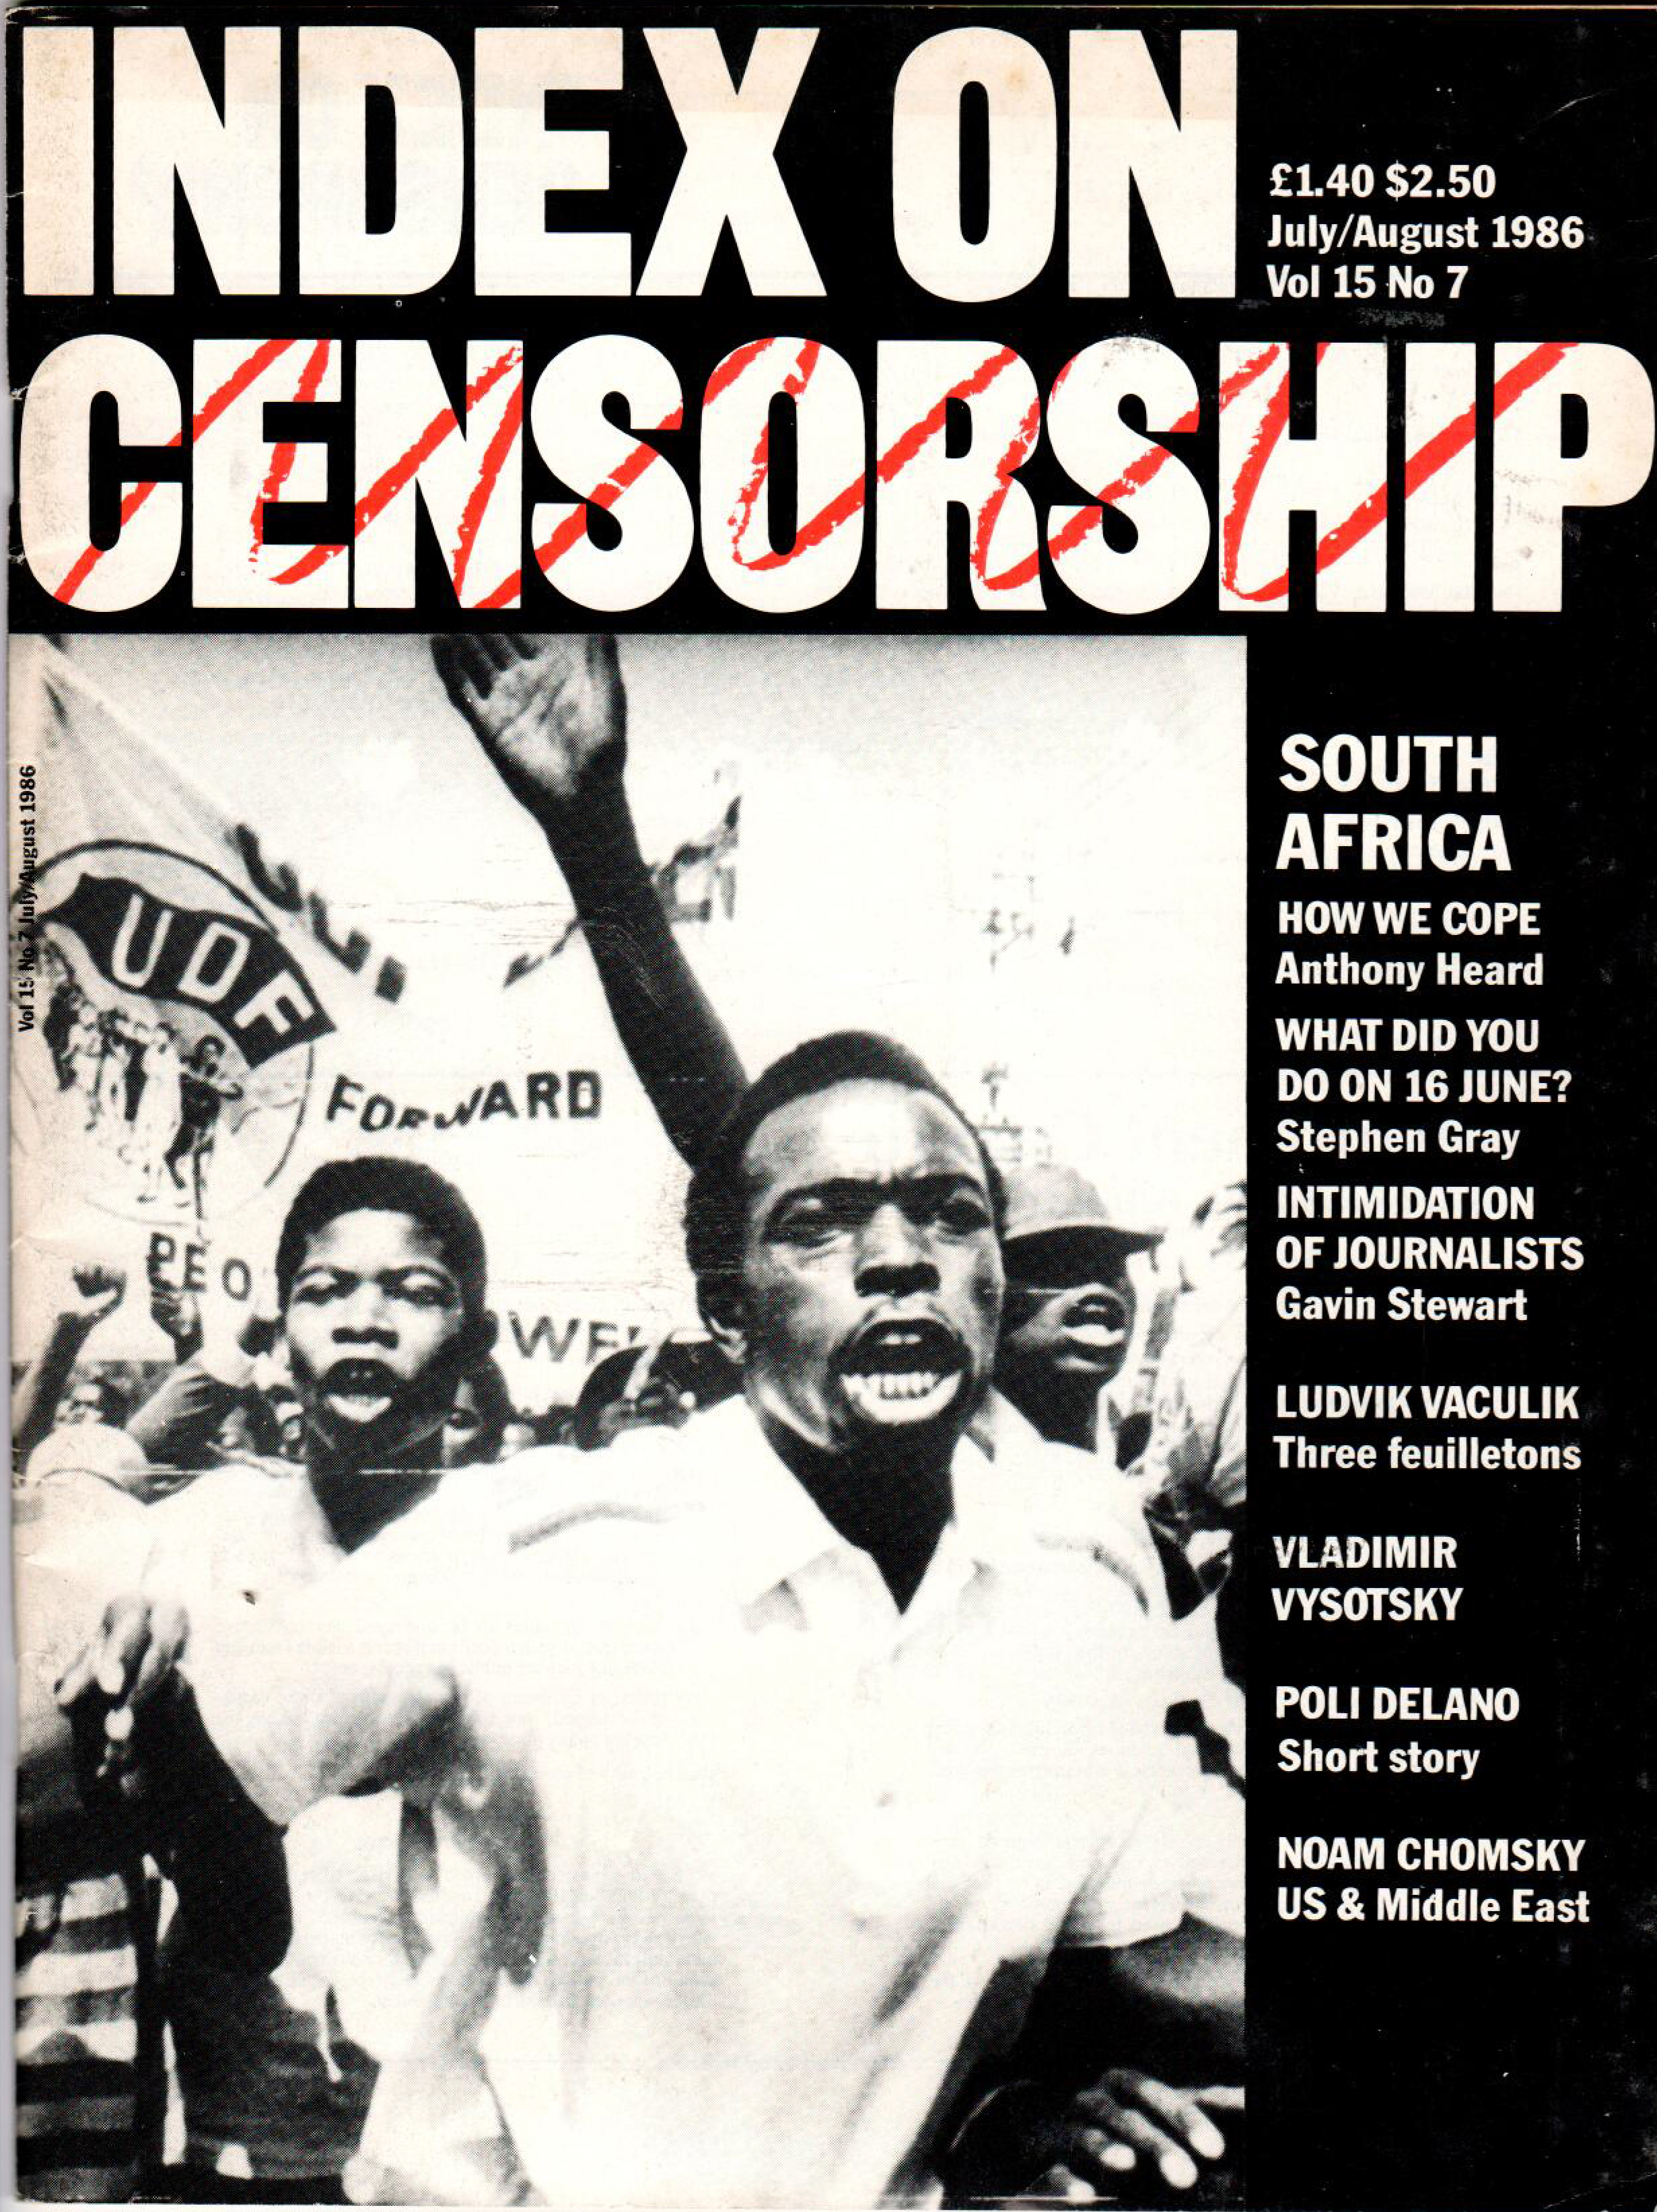 South Africa: How we cope, the July/August 1986 issue of Index on Censorship magazine.